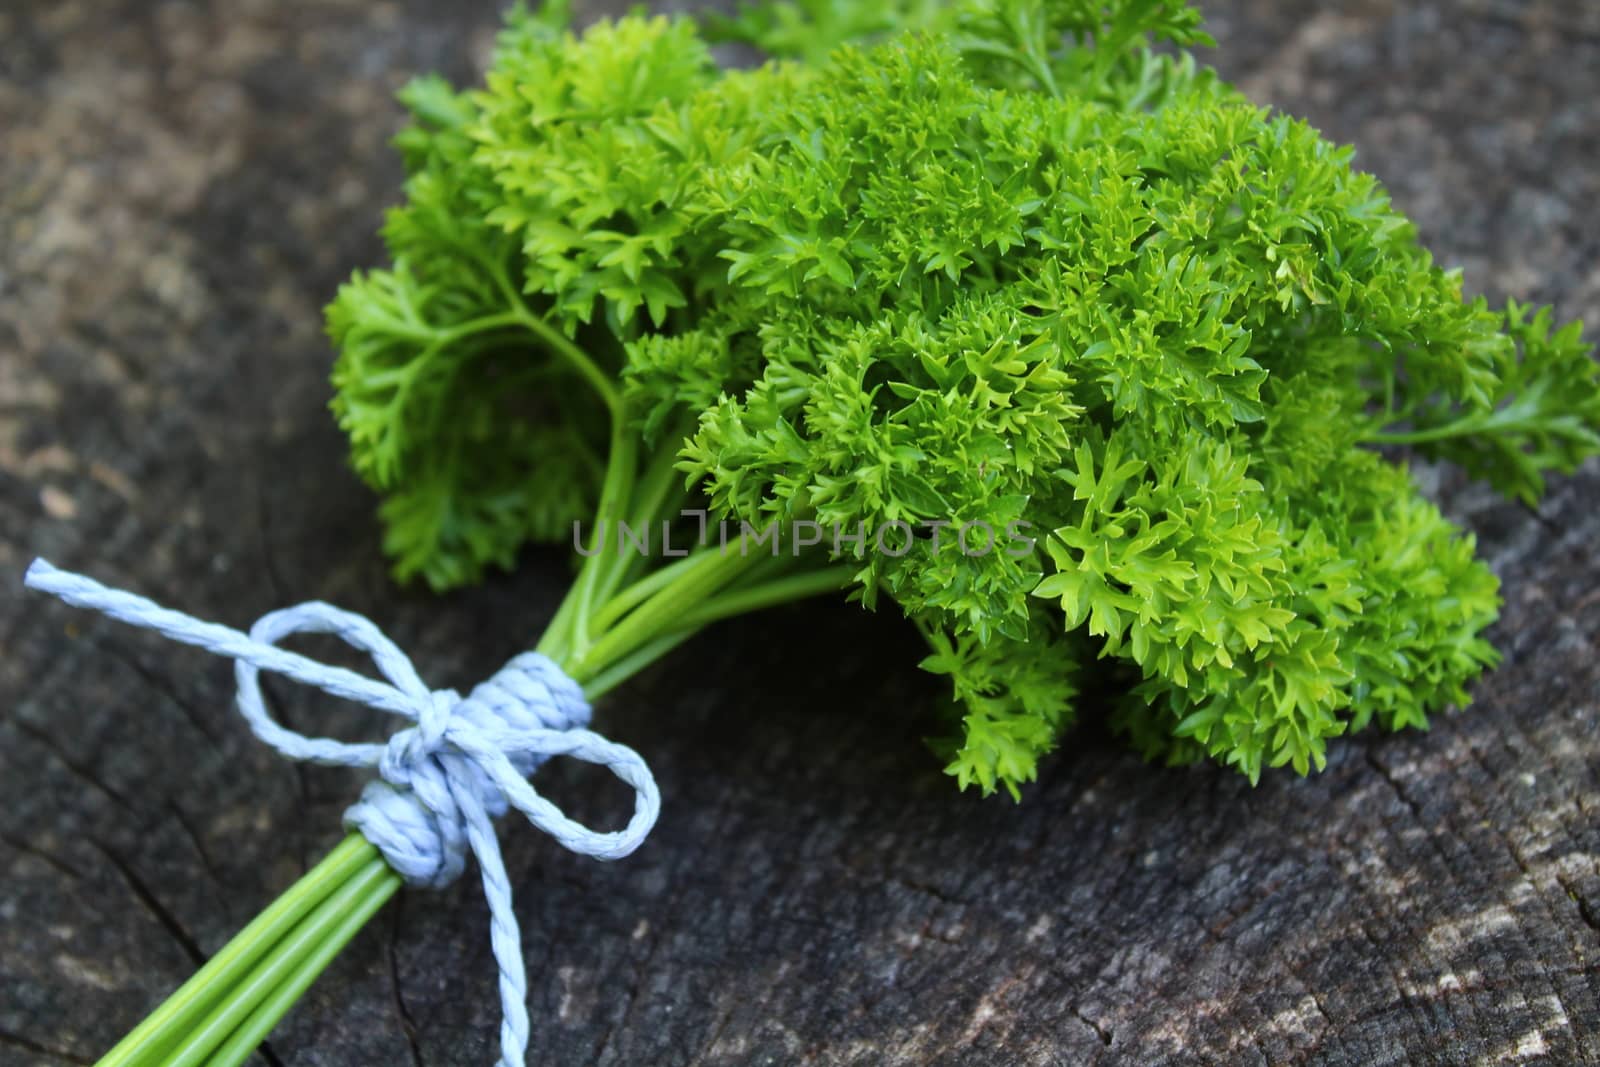 The picture shows bunch of parsley on an old weathered tree trunk